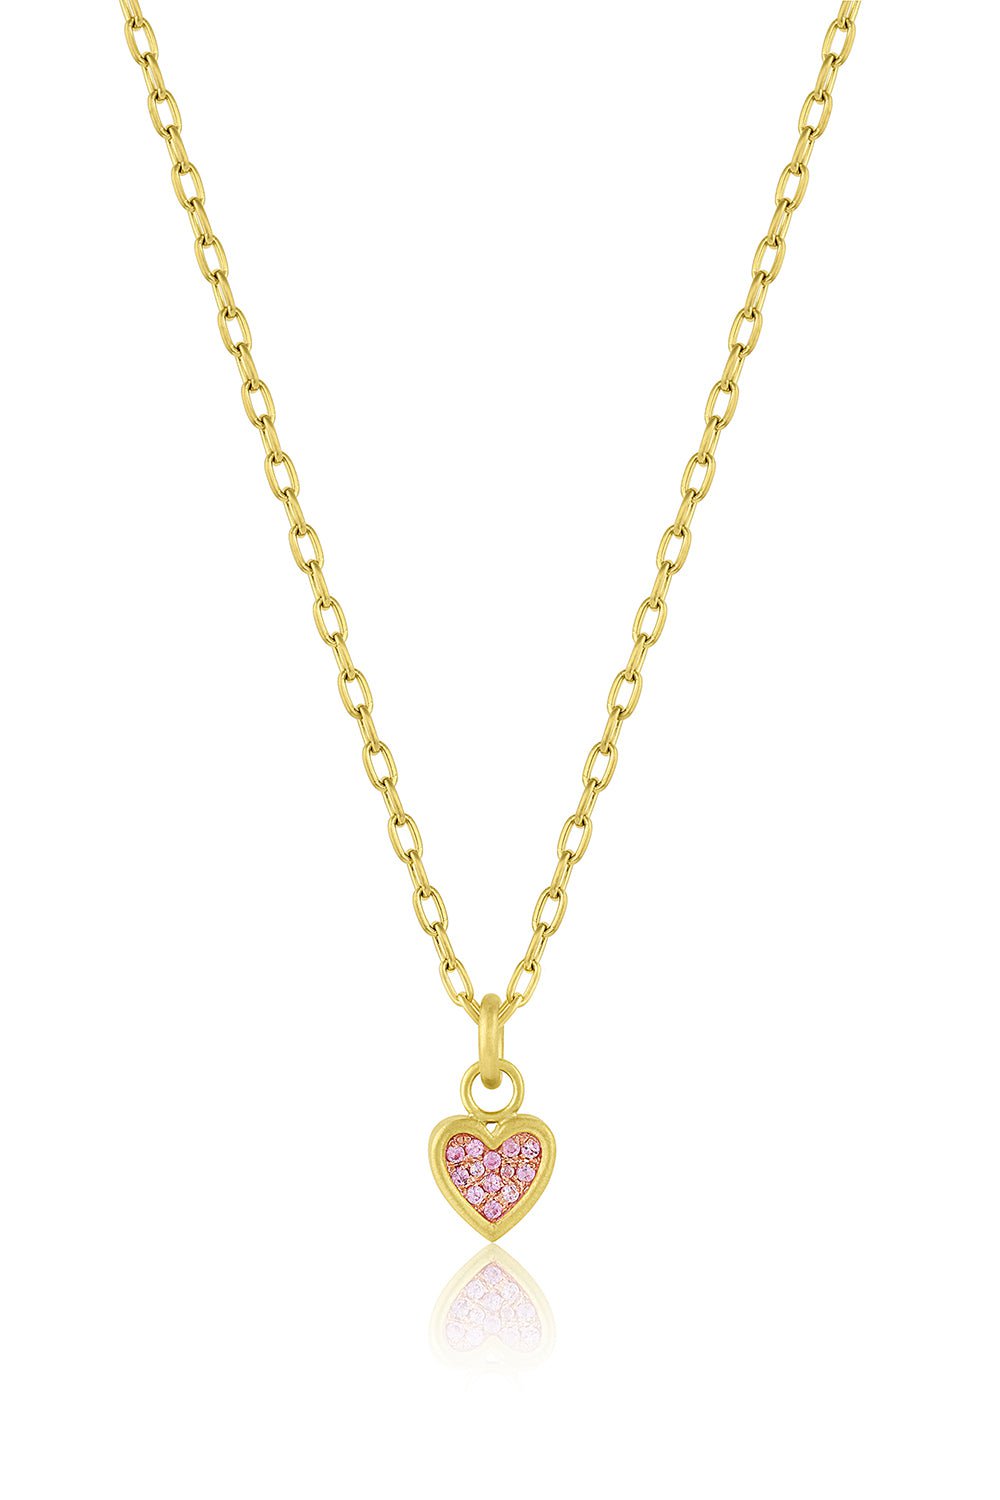 LEIGH MAXWELL-Mini Sapphire Heart Necklace-YELLOW GOLD